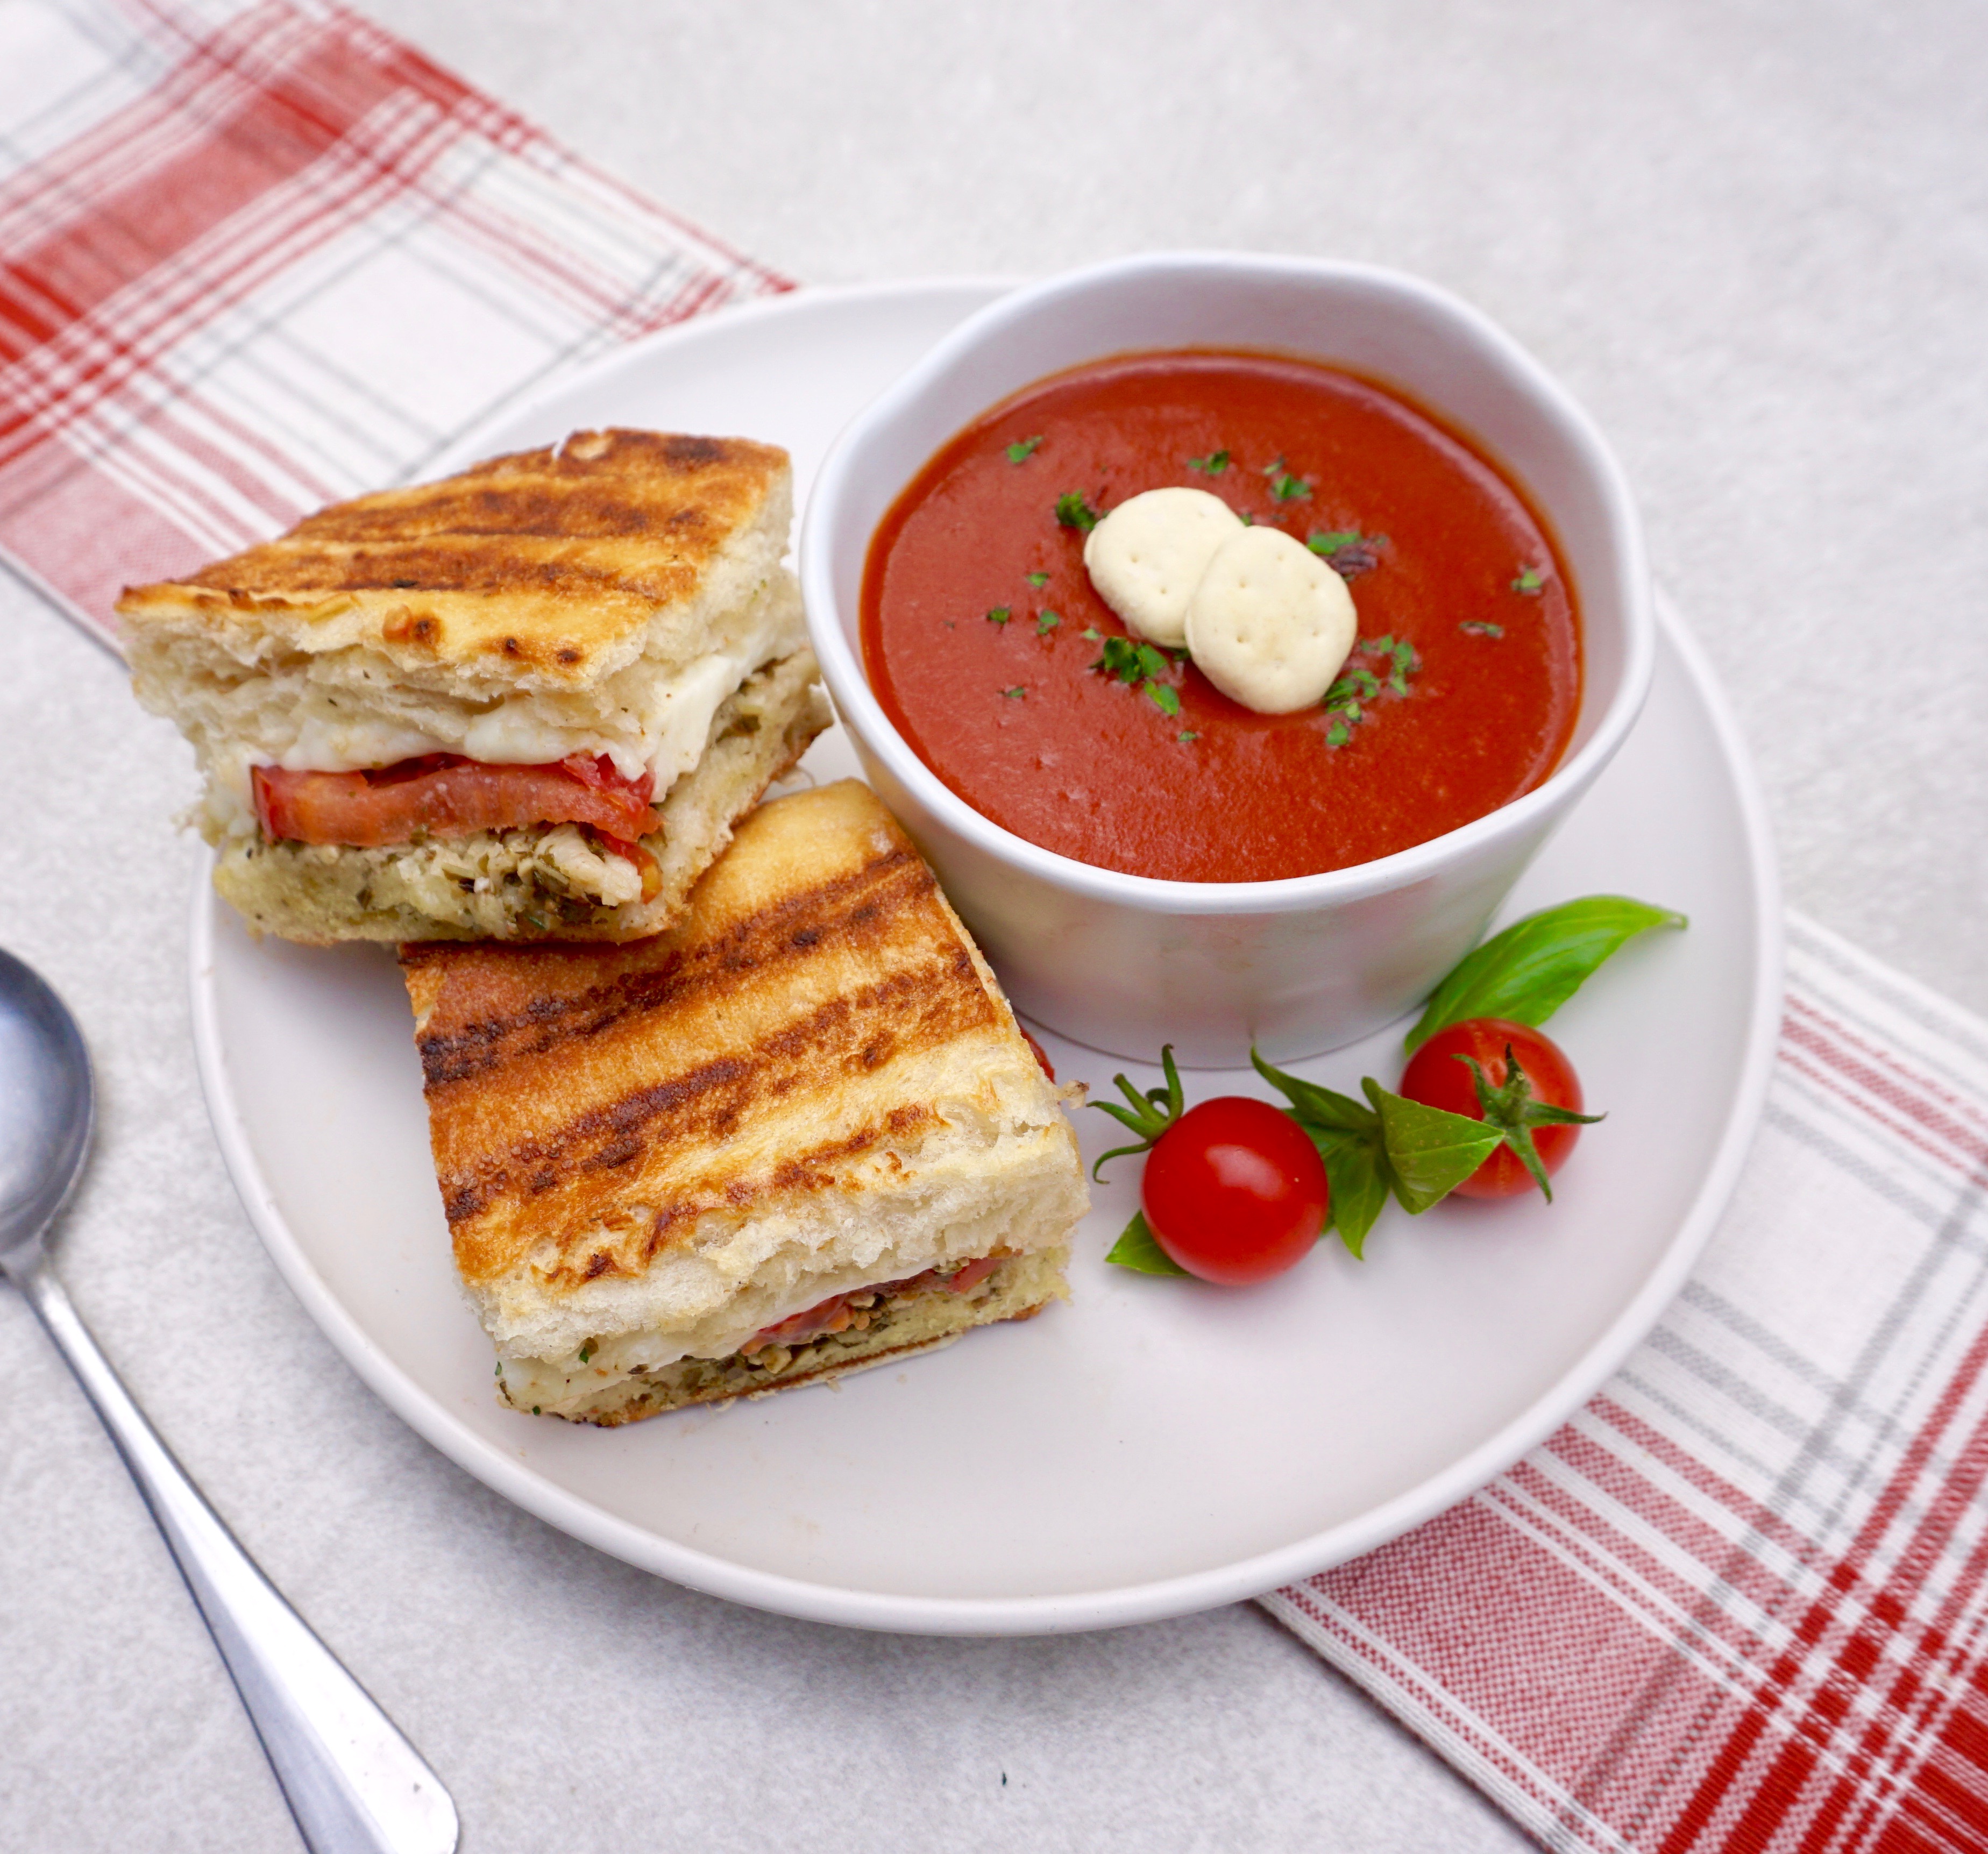 Caprese Panini is a flavorful grilled cheese sandwich